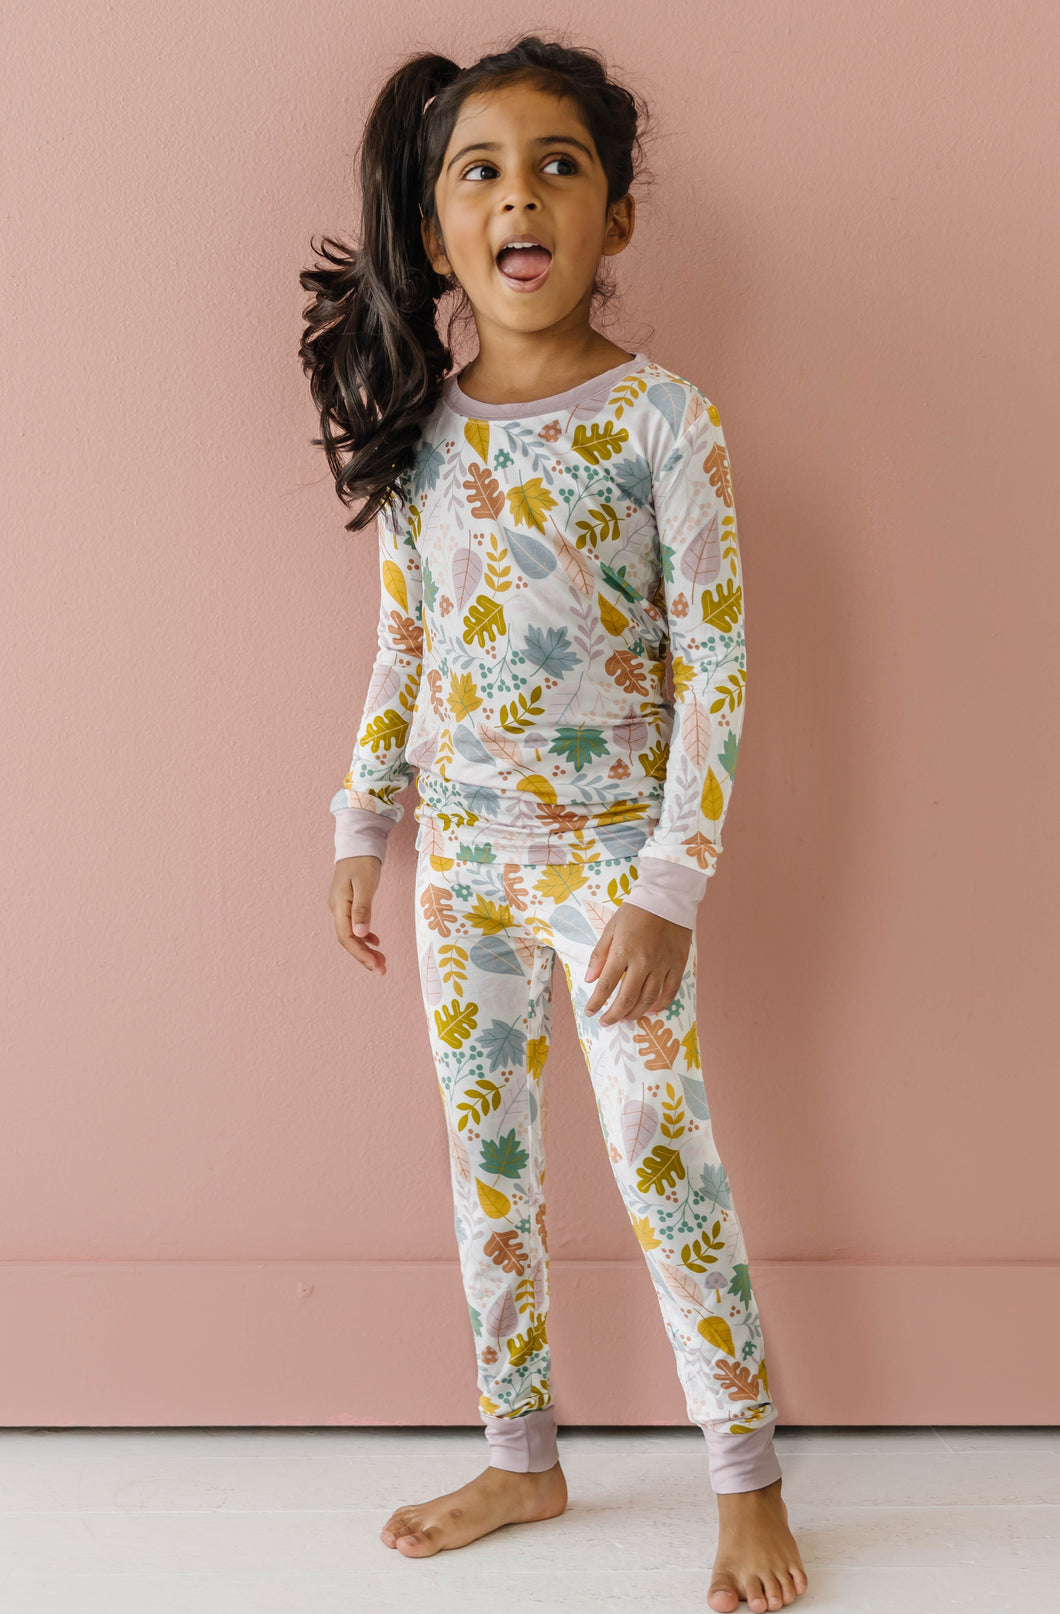 Dusty Mauve Fall Leaves Pj Set by Little Sleepies – P. Cottontail & Co.